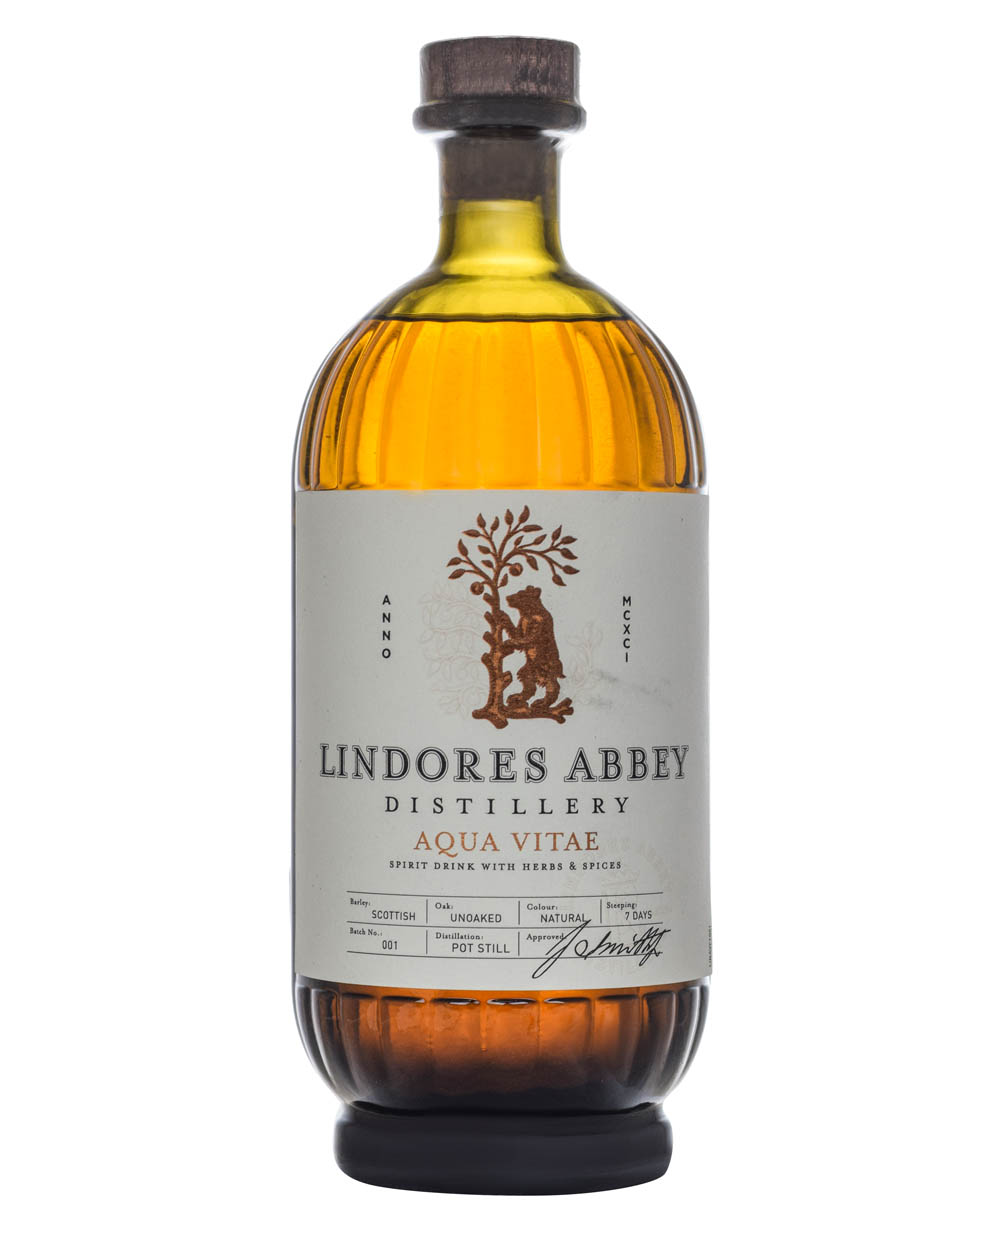 Lindores Abbey Aque Vitae Musthave Malts MHM